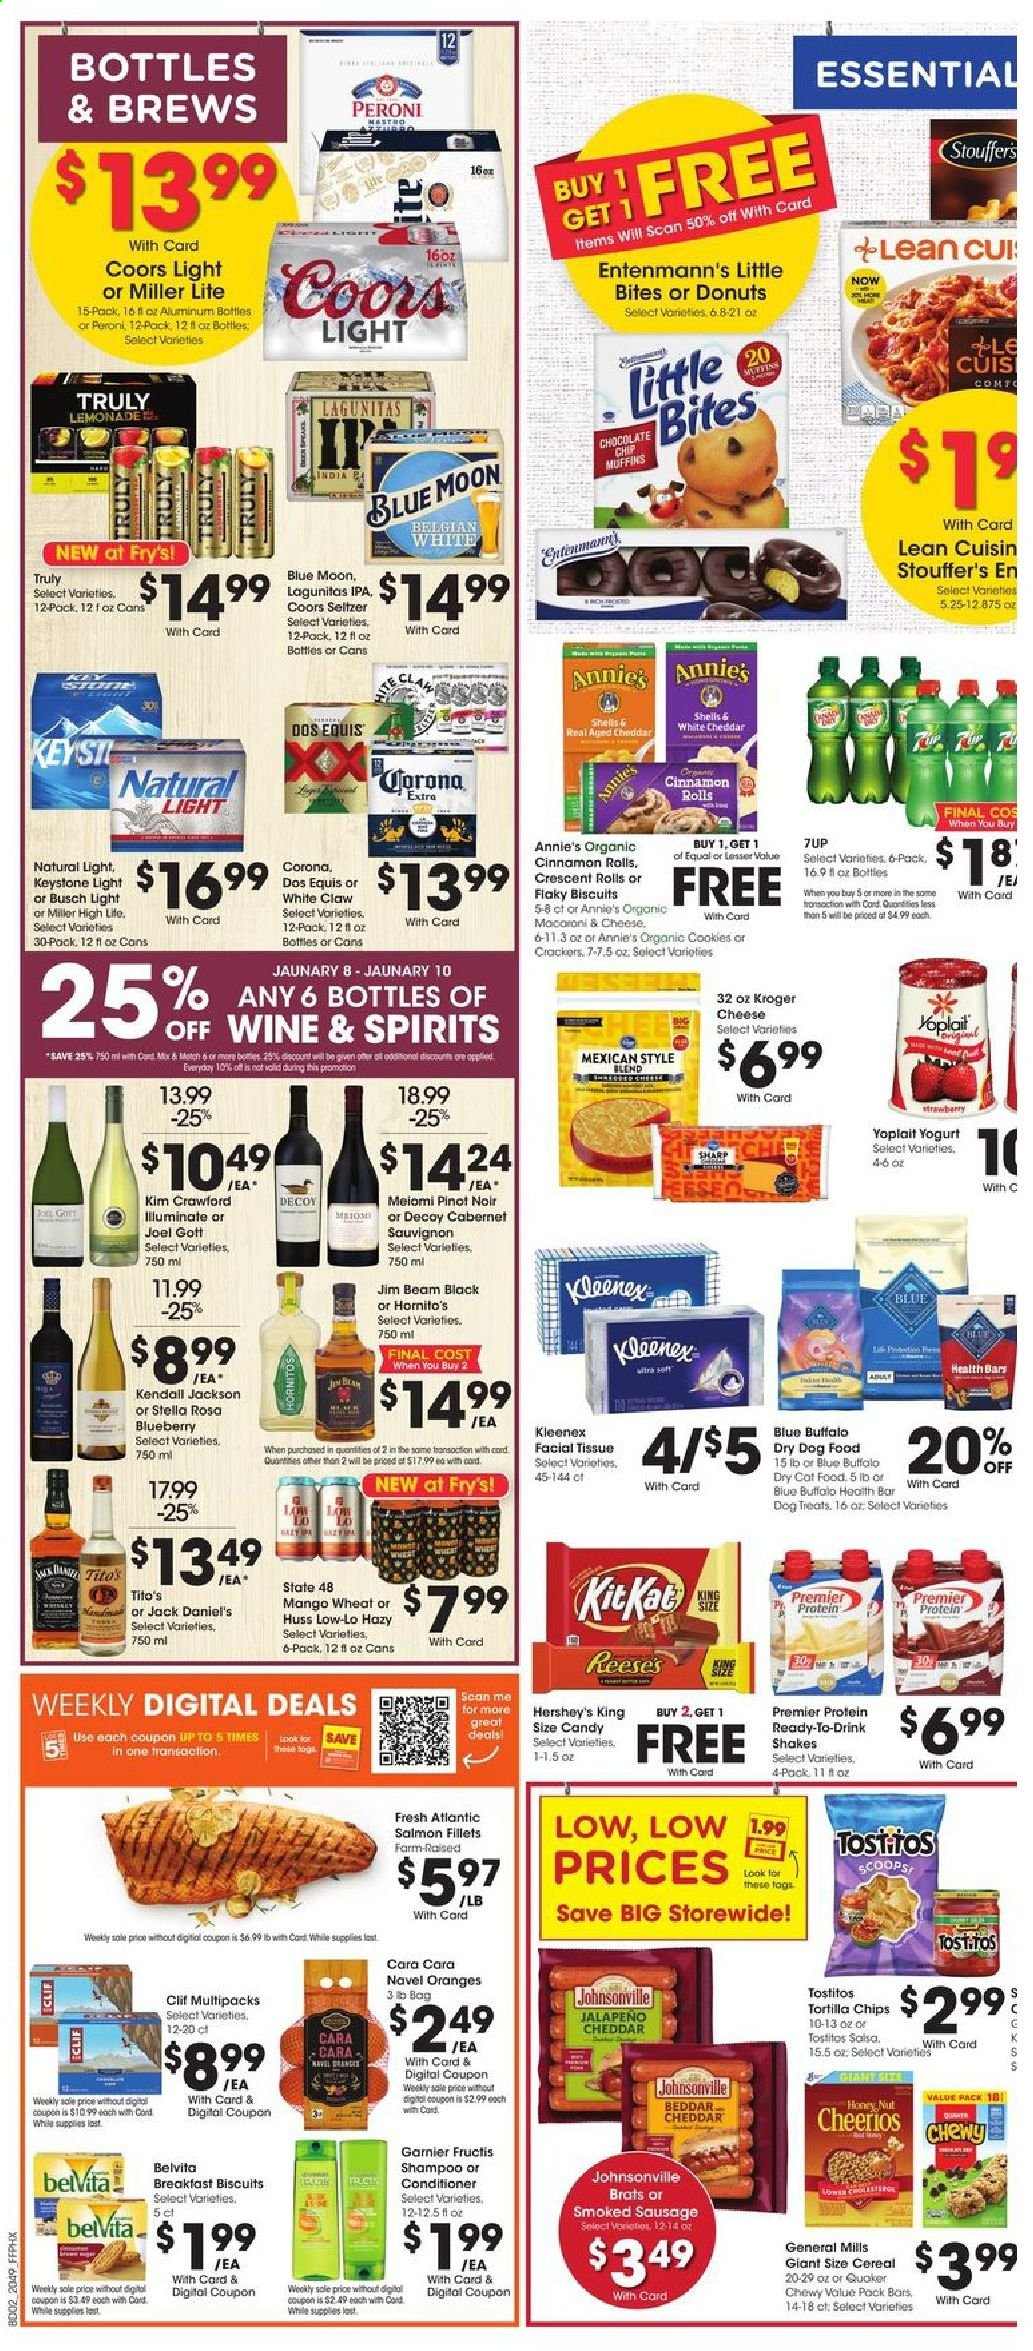 thumbnail - Fry’s Flyer - 01/06/2021 - 01/12/2021 - Sales products - Johnsonville, cinnamon roll, crescent rolls, donut, muffin, Entenmann's, Little Bites, oranges, salmon, salmon fillet, Jack Daniel's, Annie's, sausage, smoked sausage, cheddar, yoghurt, Yoplait, shake, salsa, Reese's, Hershey's, mango, Stouffer's, cookies, KitKat, crackers, biscuit, tortilla chips, chips, Tostitos, jalapeño, cereals, Cheerios, belVita, lemonade, 7UP, seltzer water, L'Or, Cabernet Sauvignon, wine, Pinot Noir, Jim Beam, White Claw, TRULY, beer, Miller Lite, Coors, Dos Equis, Blue Moon, Busch, Corona Extra, Peroni, IPA, Keystone, Kleenex, tissues, shampoo, Garnier, conditioner, Fructis, animal food, Blue Buffalo, cat food, dry cat food. Page 4.